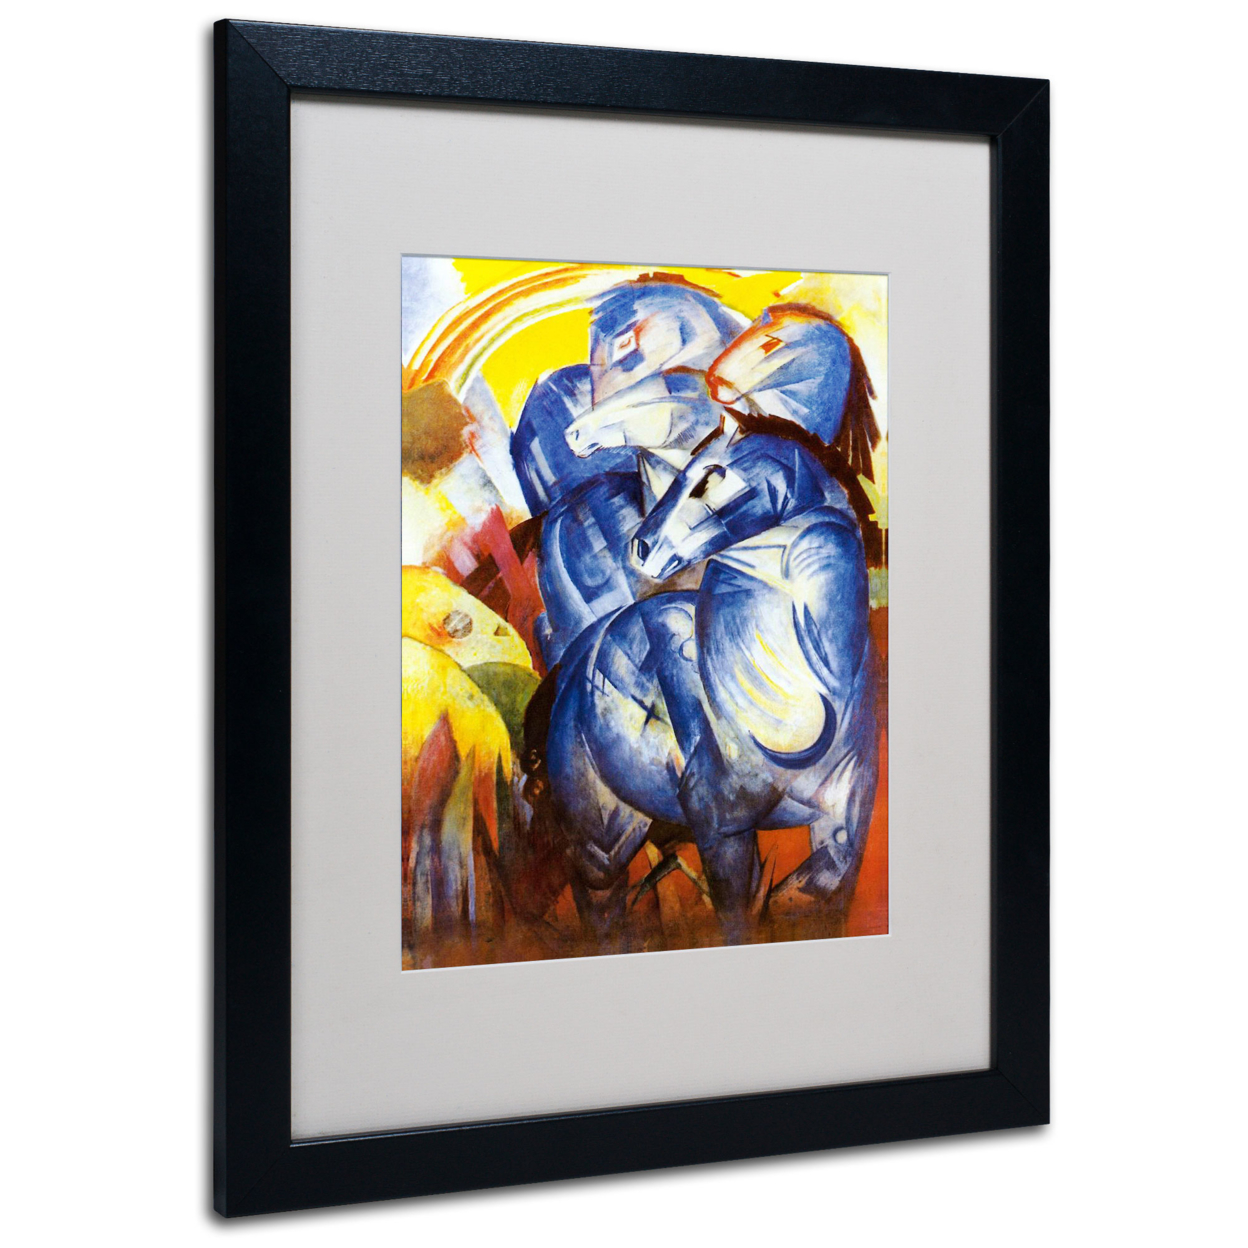 Franz Marc 'A Tower Of Blue Horses 1913' Black Wooden Framed Art 18 X 22 Inches